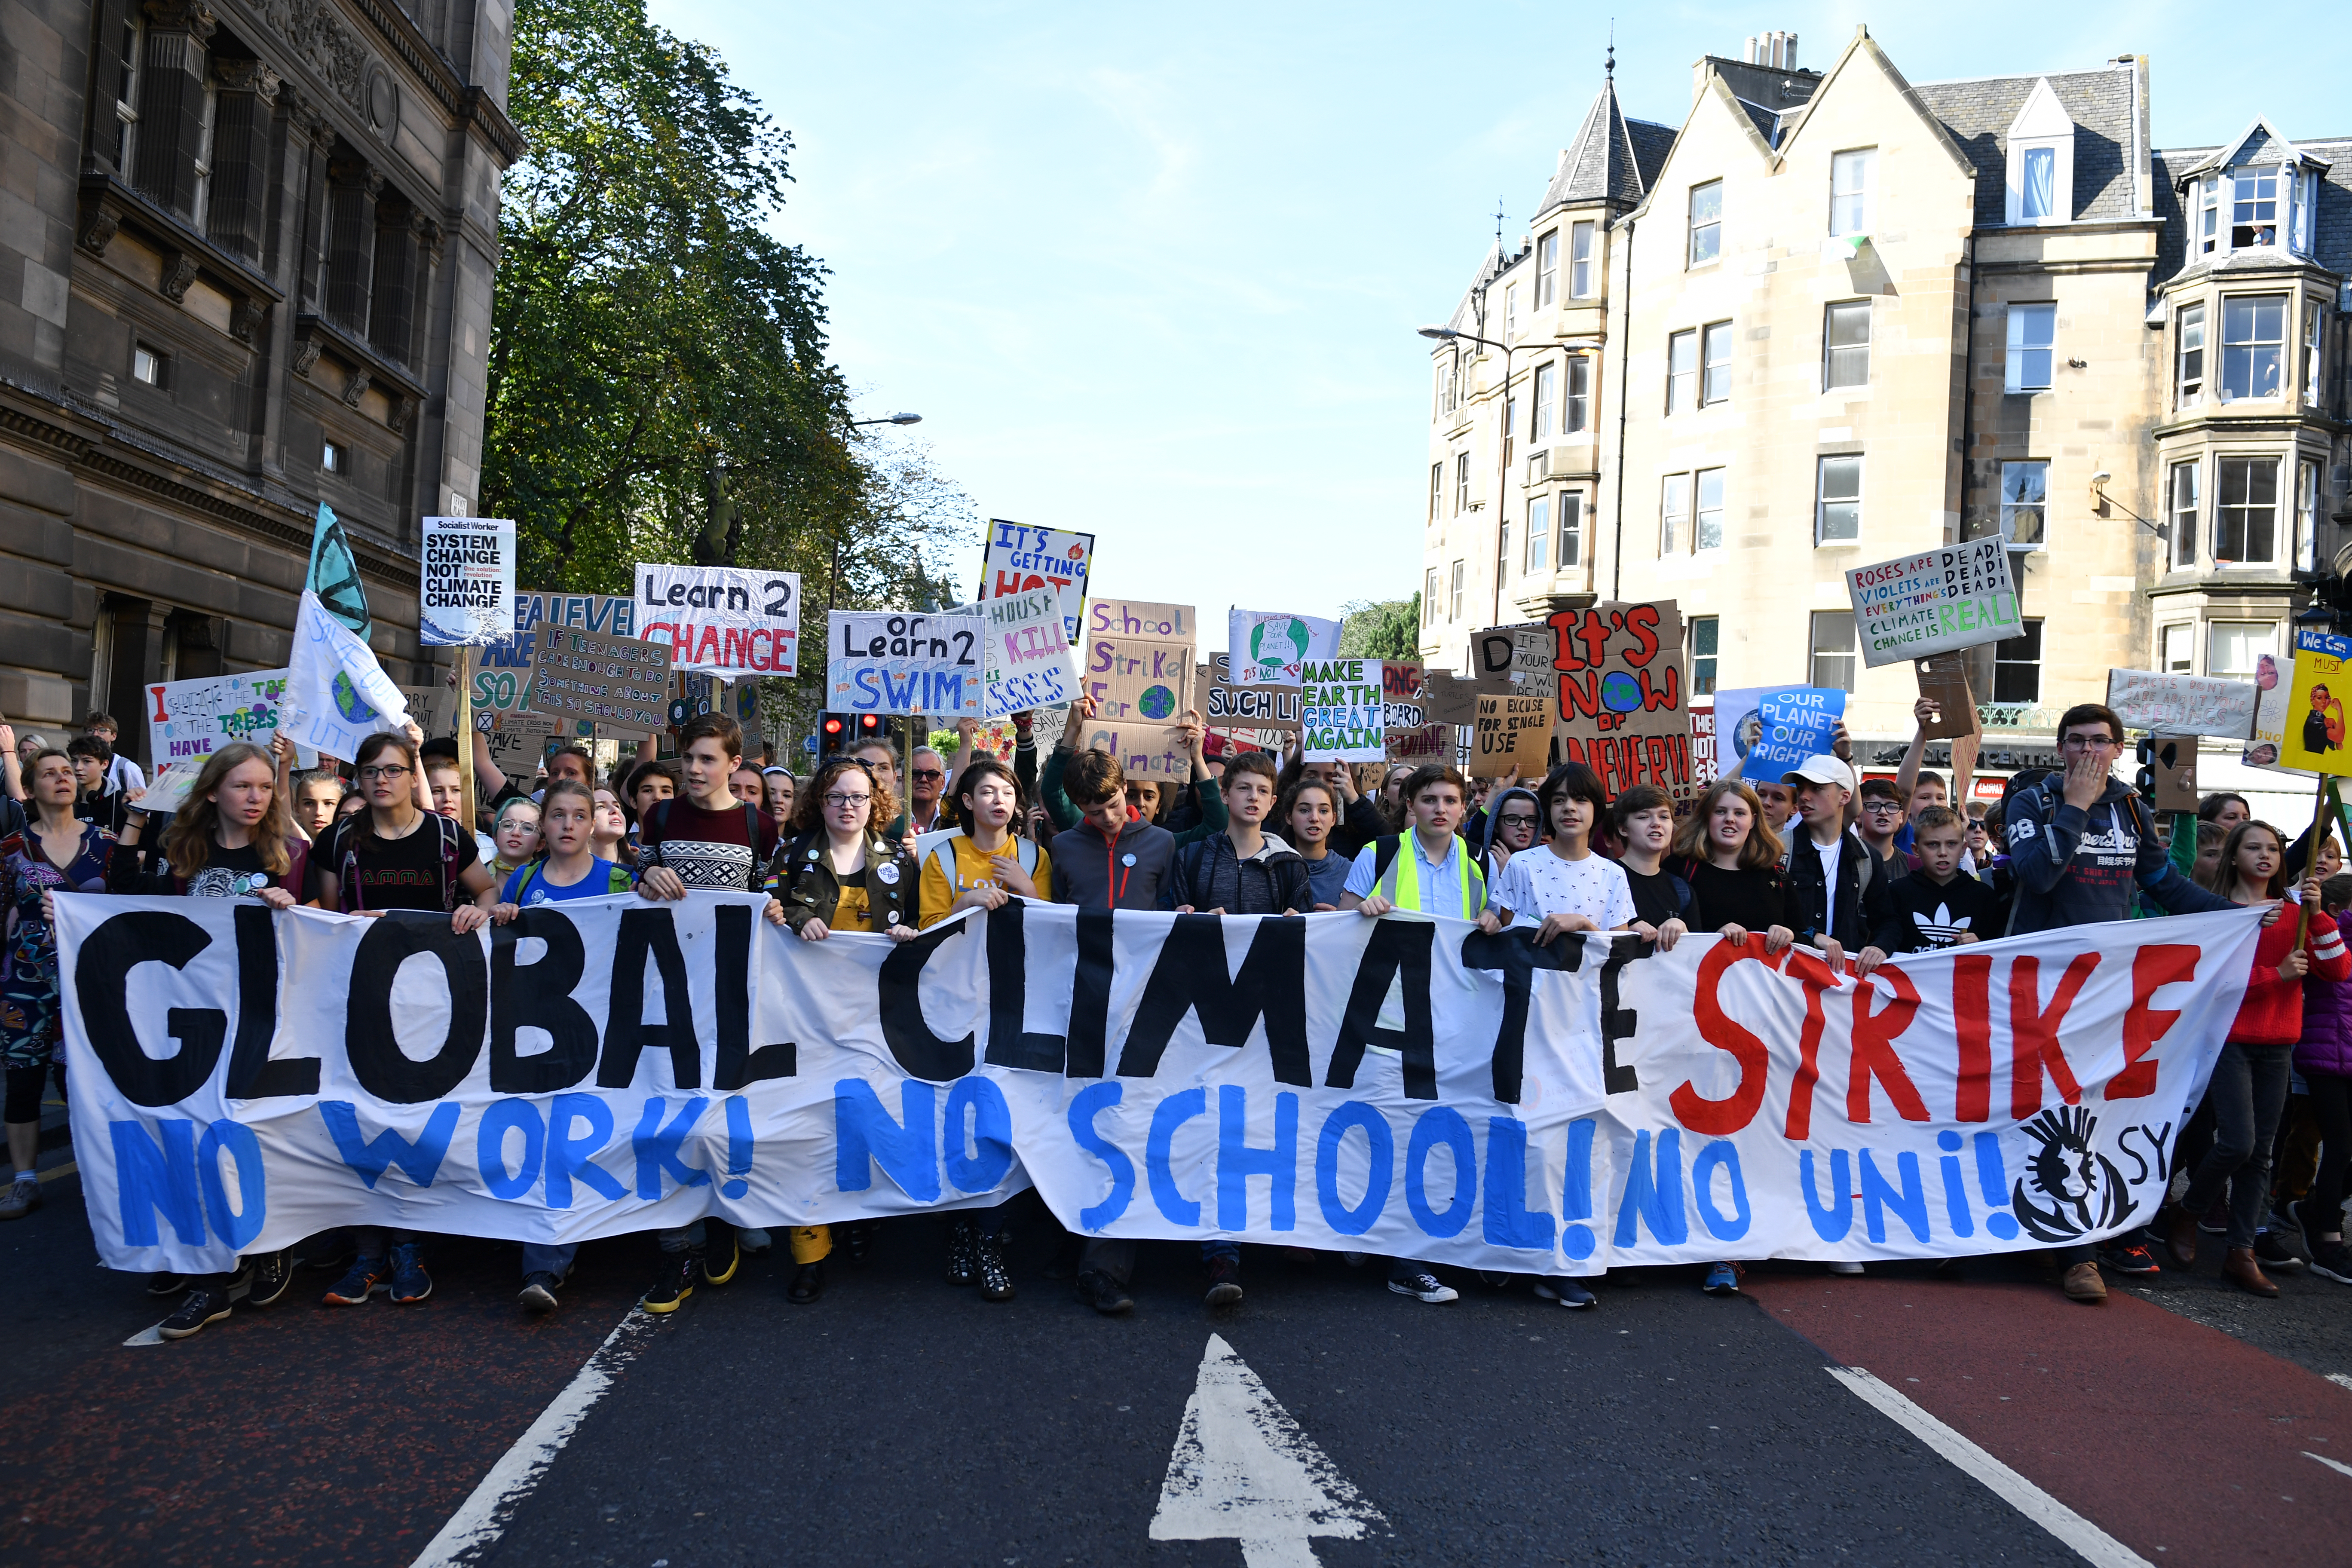 Campaigners protest during a climate change action day on September 20, 2019 in Edinburgh, Scotland. Protests are taking place today worldwide, with campaigners demanding that governments and corporations take steps towards lowering CO2 emissions and combating the warming of the Earth's temperatures.